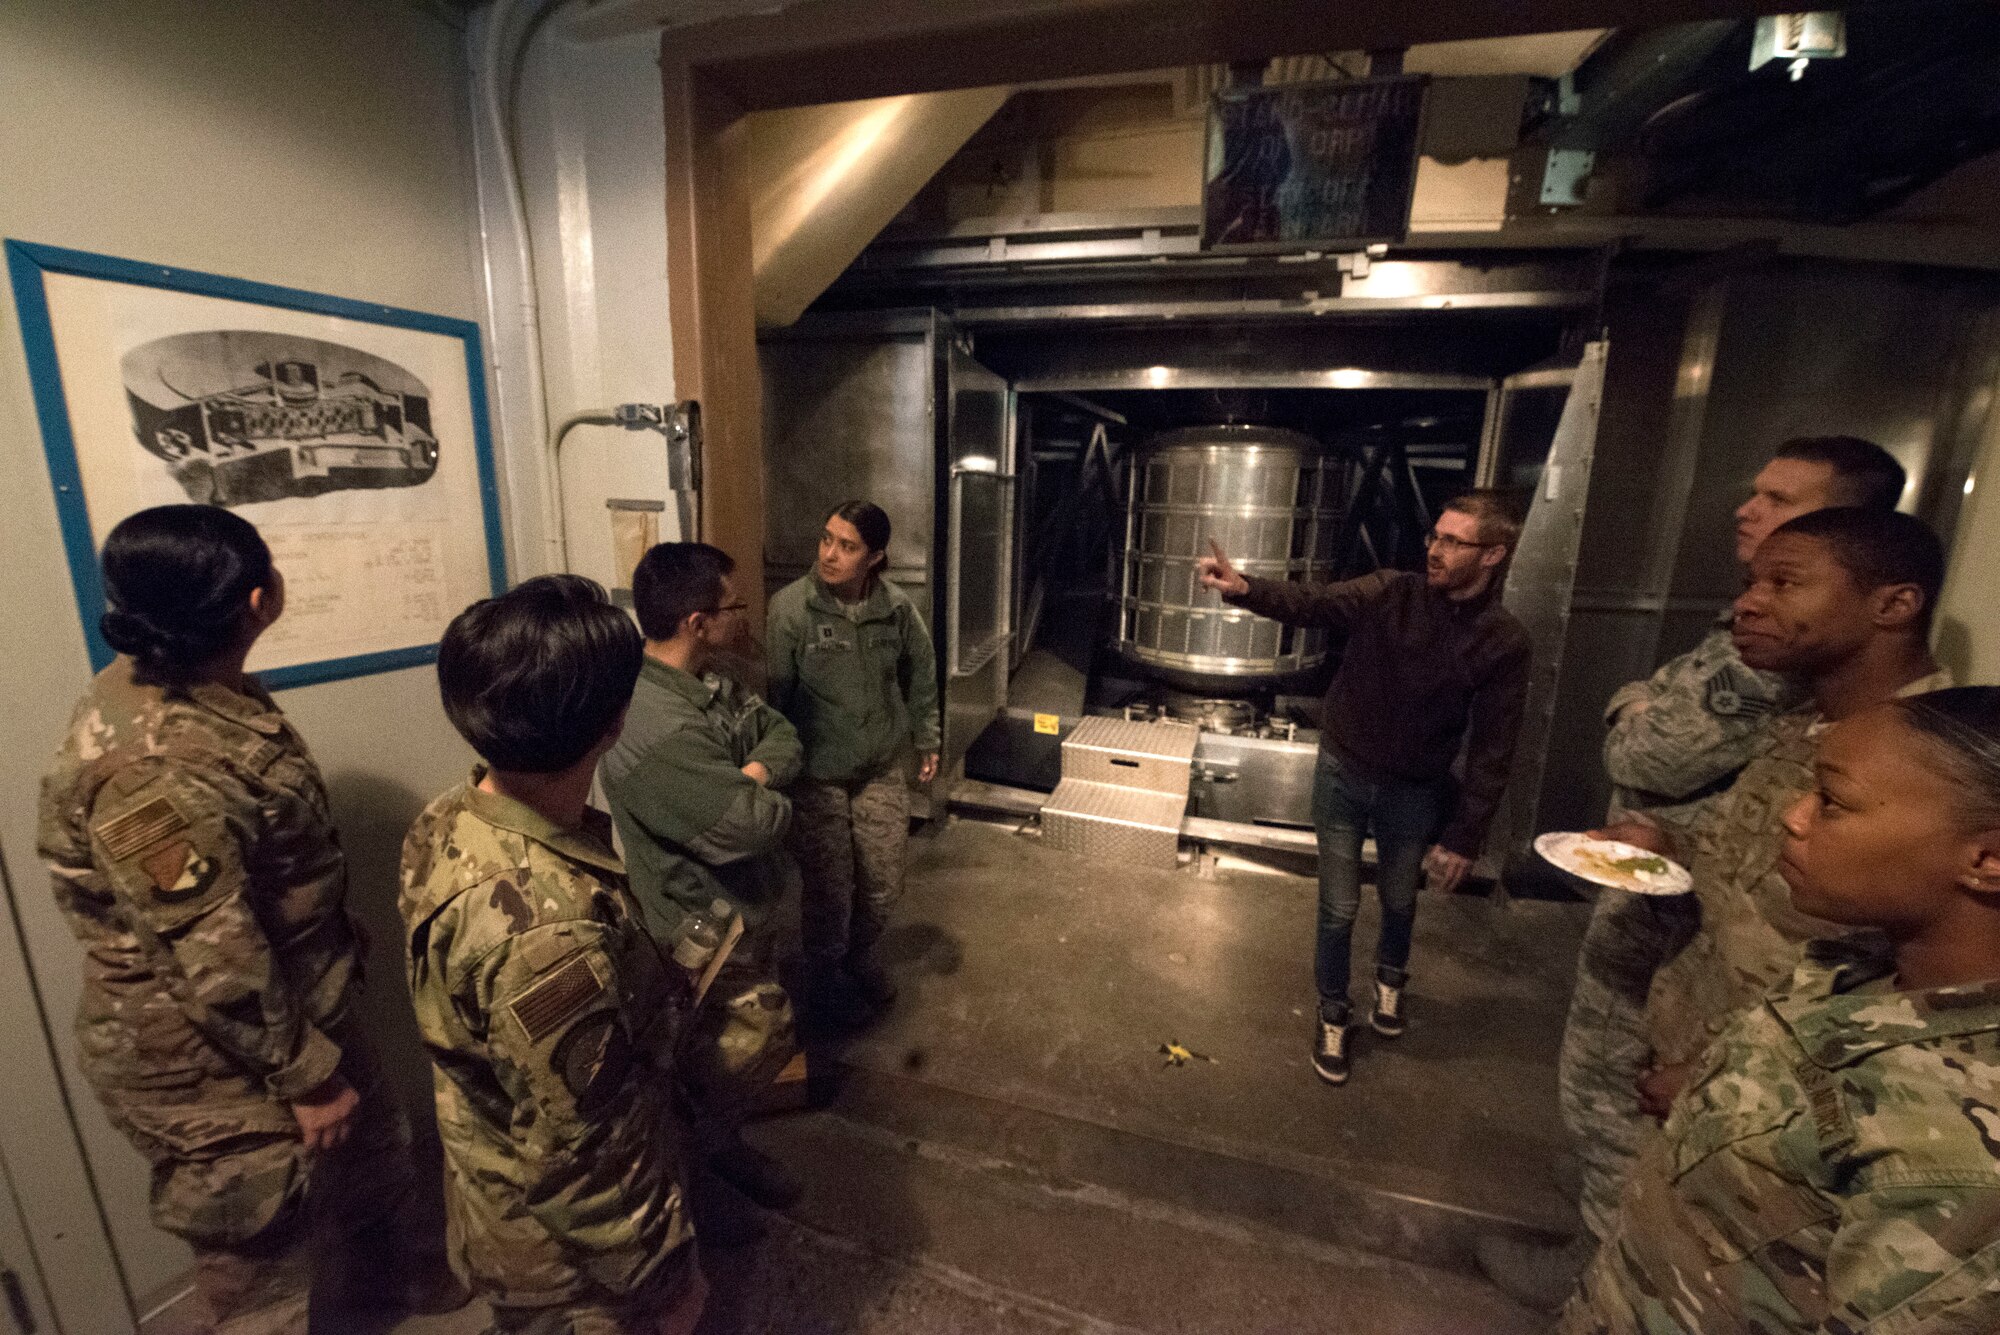 Sean Abrahamson, 746th Test Squadron test manager, gives guests a tour of the 746th TS facilities, Oct. 25, 2019, on Holloman Air Force Base, N.M. The test squadron provided facility tours featuring test equipment and hardware, an aircraft flyover and opened a time capsule from 1963 as part of their 60th anniversary celebration. (U.S. Air Force photo by Staff Sgt. Christine Groening)